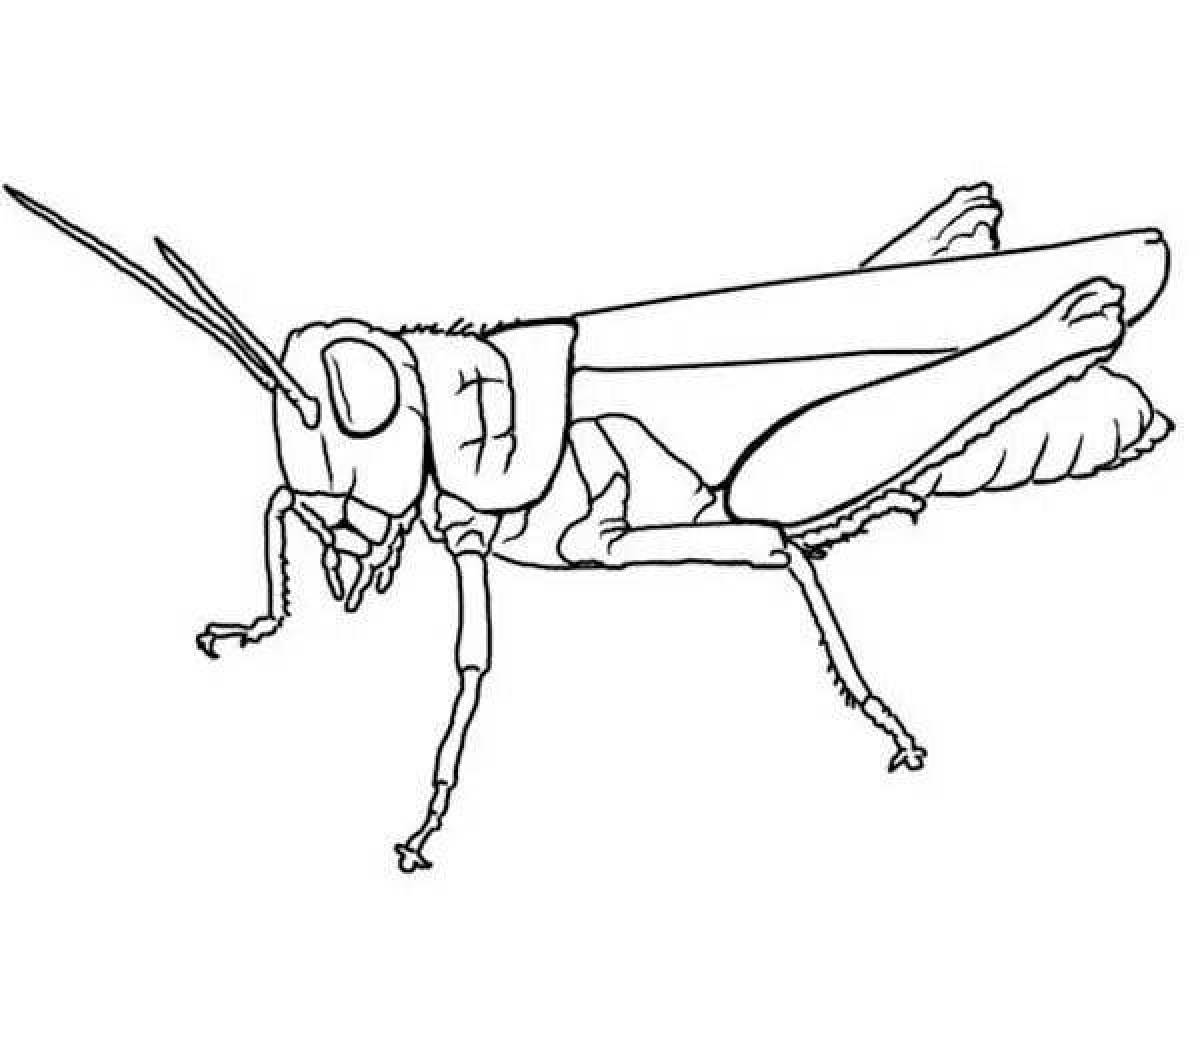 Vibrant grasshopper coloring page for kids